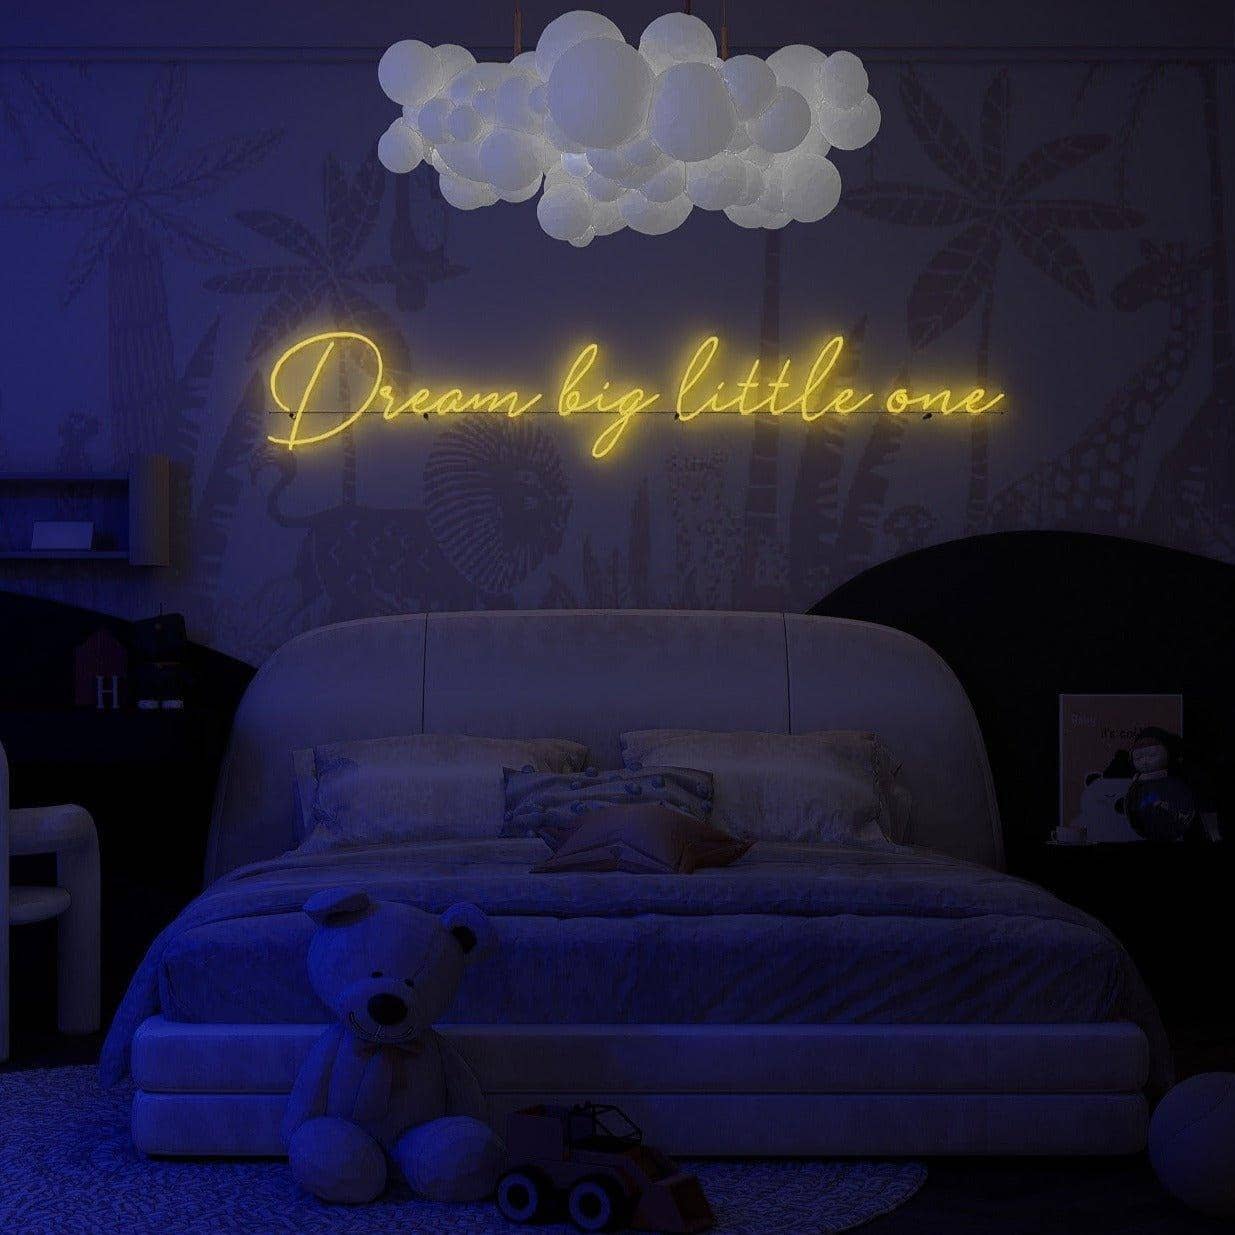 yellow-neon-light-size-chart-that-lights-up-in-the-night-for-display-in-the-bedroom-dream-big-little-one